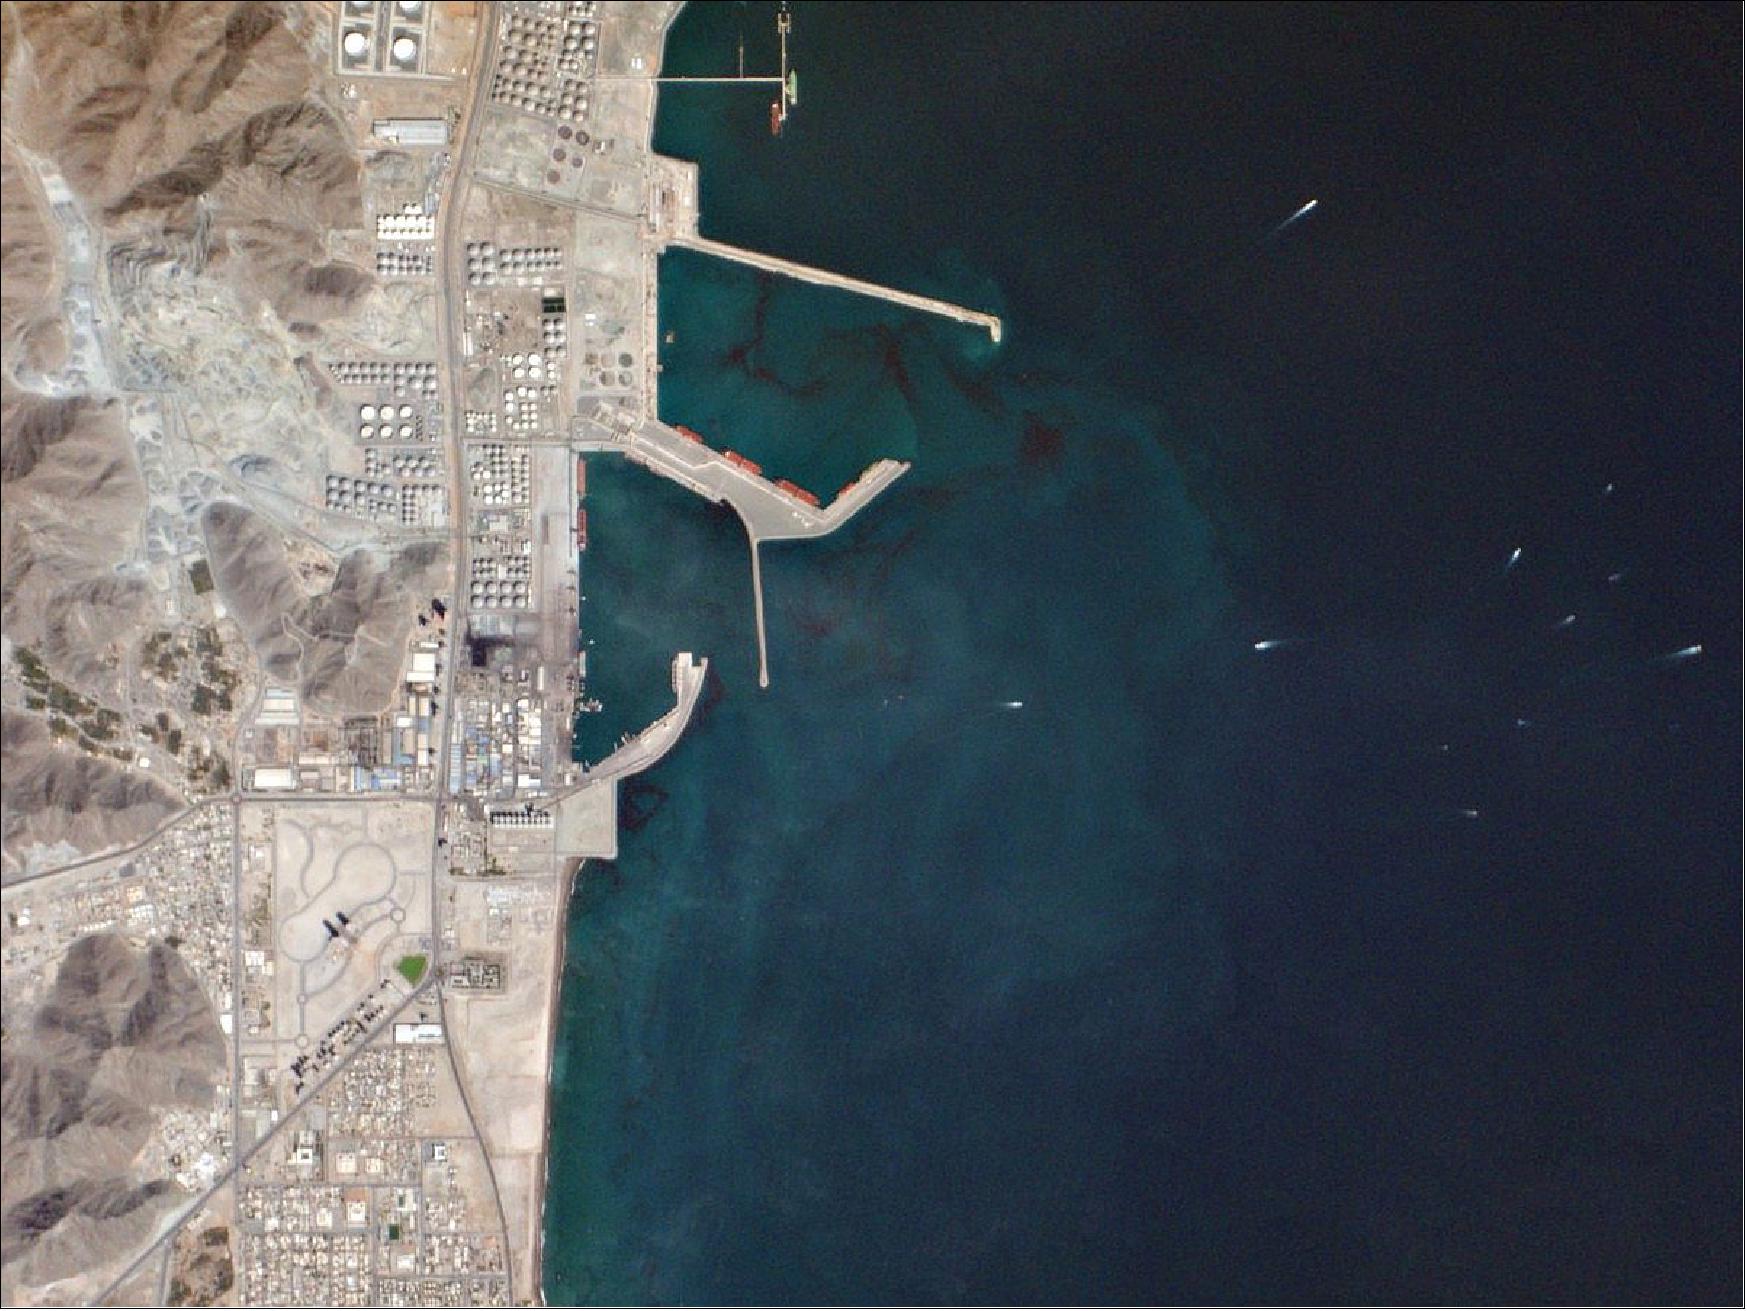 Figure 46: Fujairah oil industry zone, United Arab Emirates, acquired in early March 2015 (image credit: Planet Labs, Ref. 81)